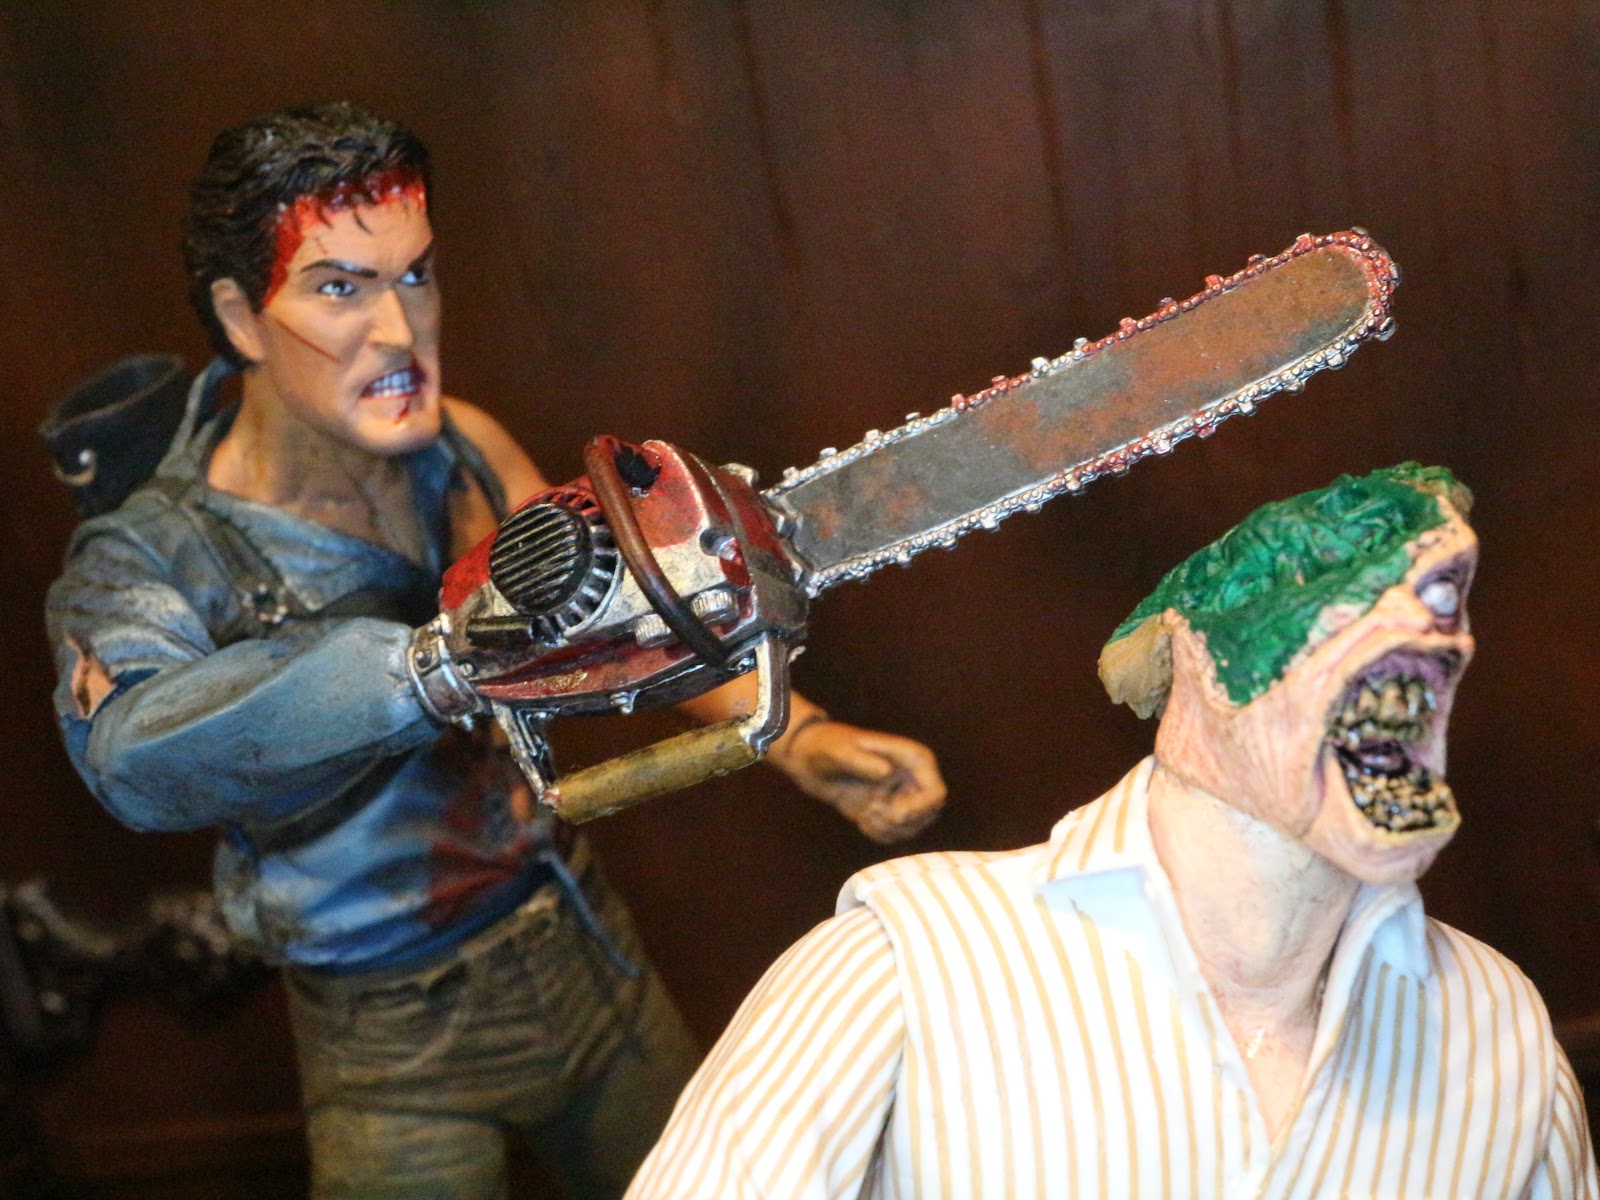 Evil Dead: The Game - Ash Williams S-Mart Employee Outfit - Epic